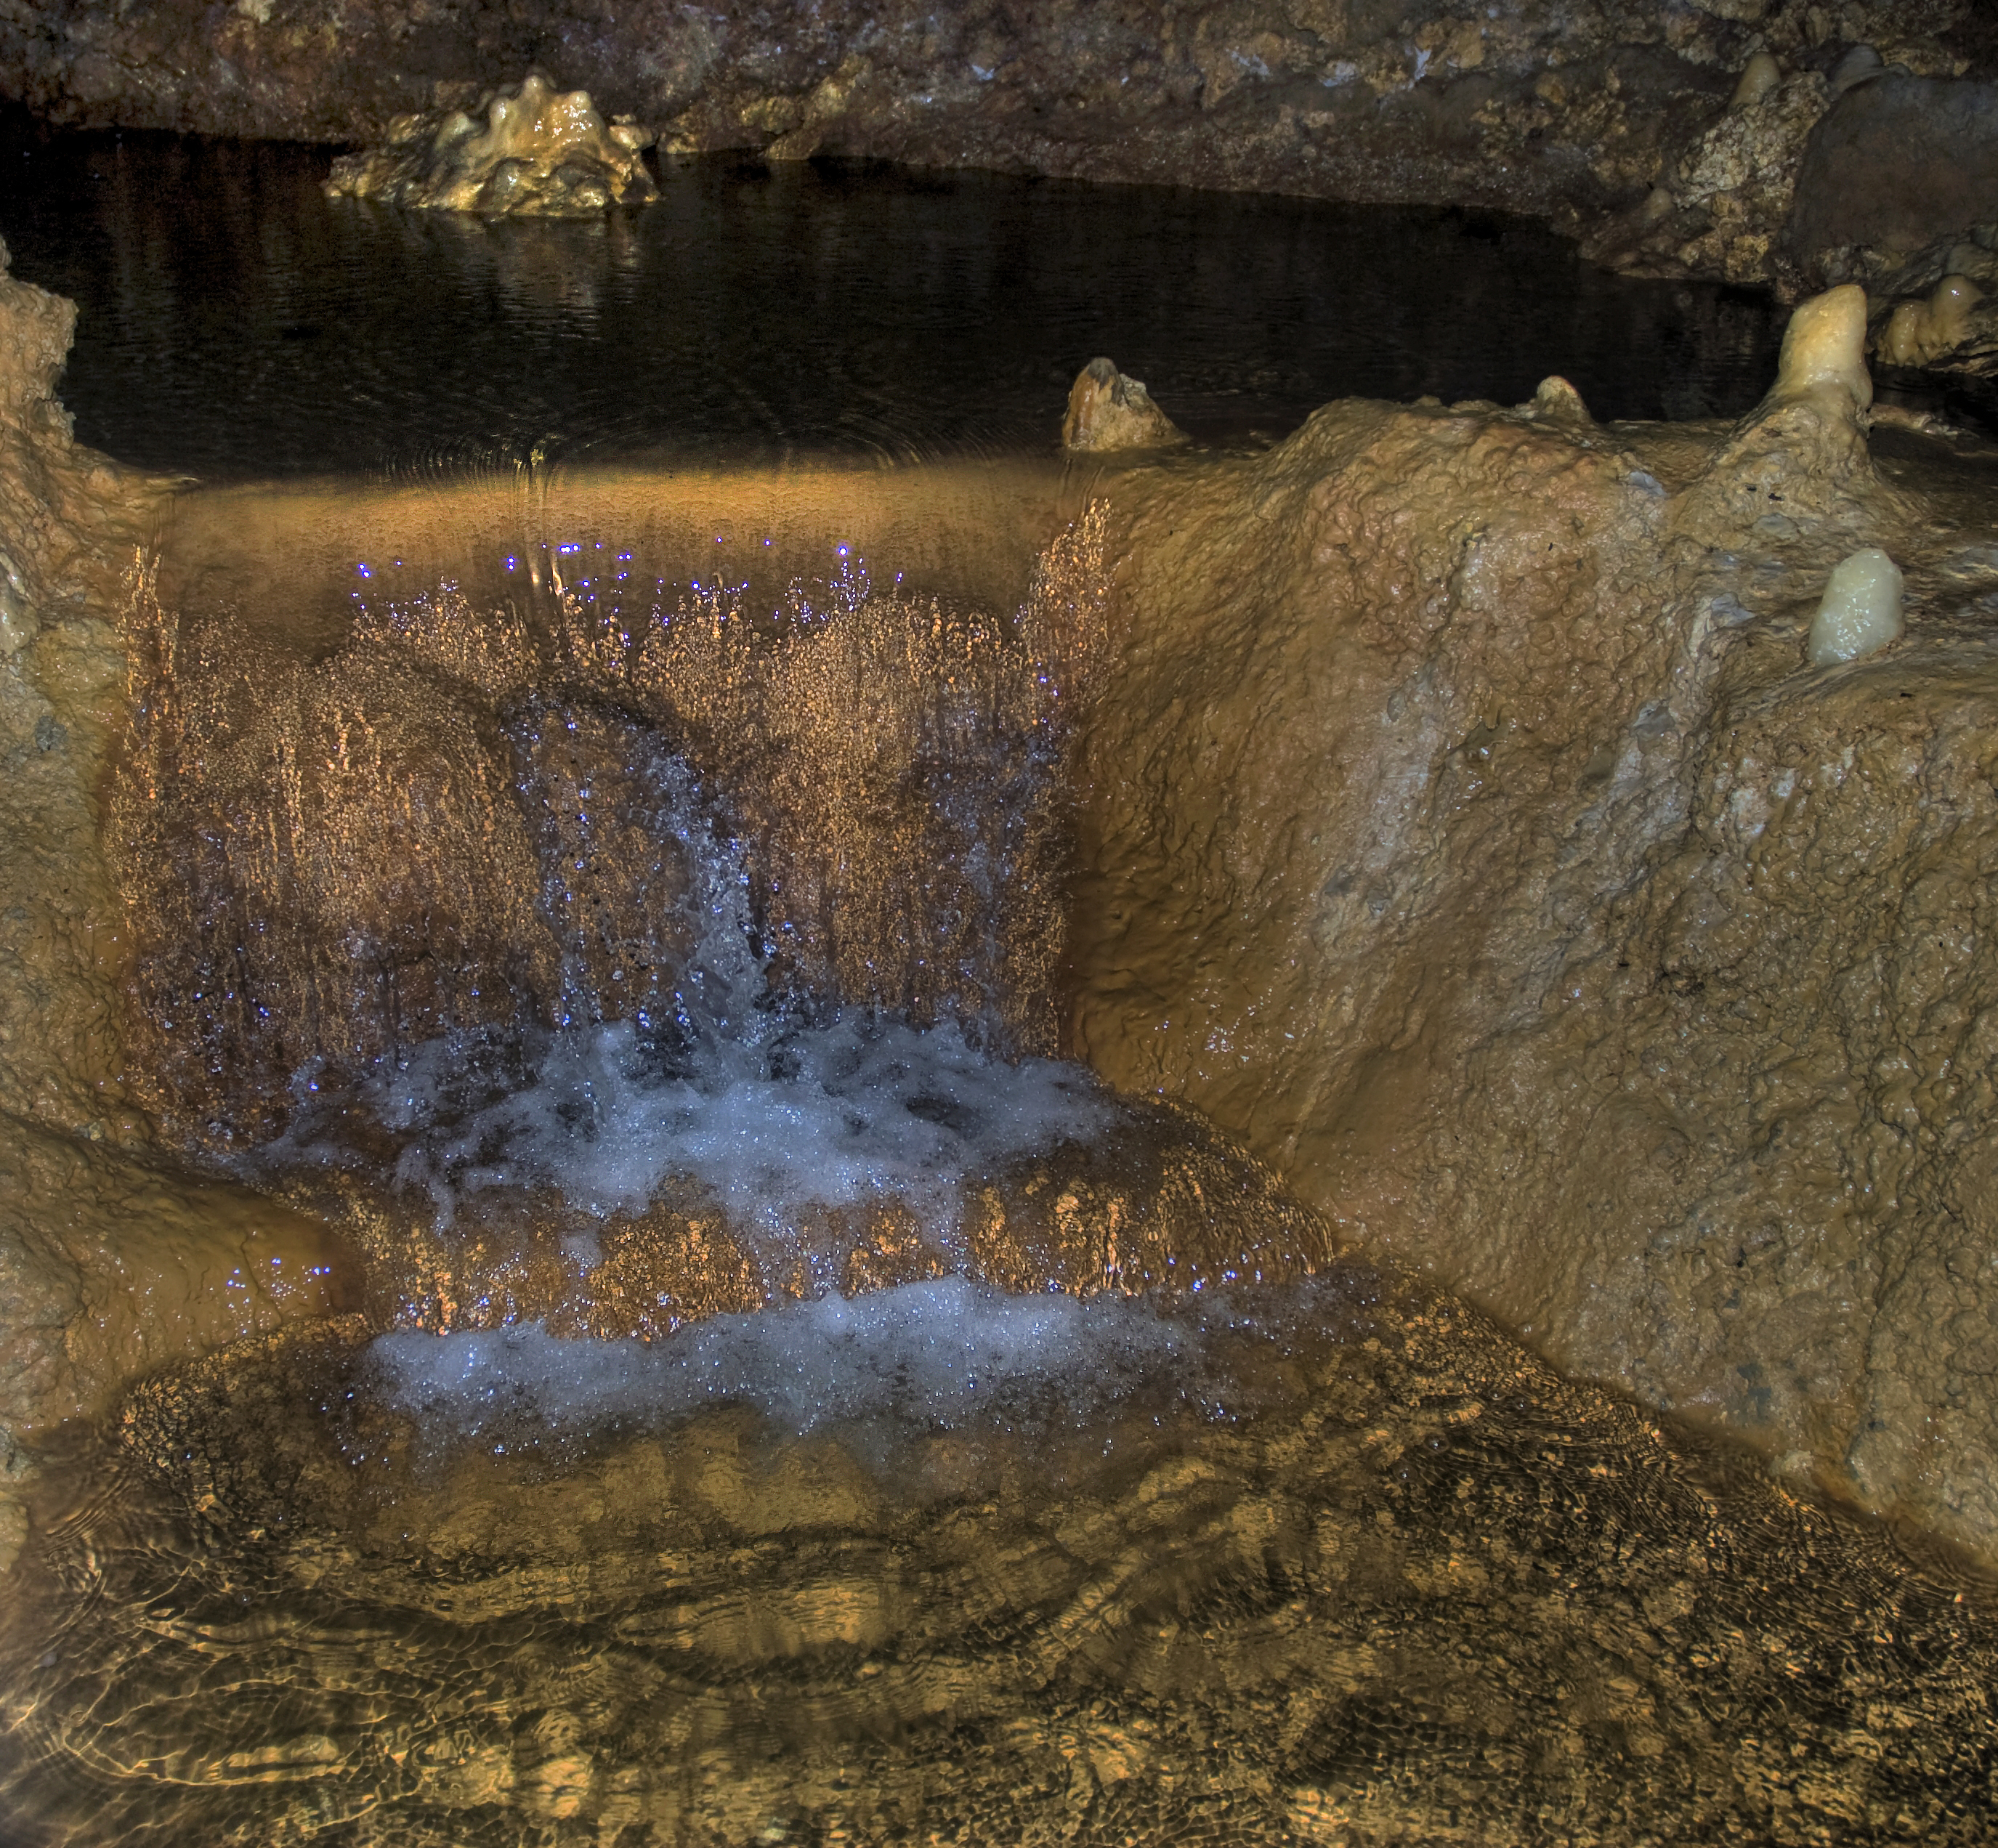 Golden water at Harrison's Cave on Barbados port of call. Image from Wikimedia Commons.